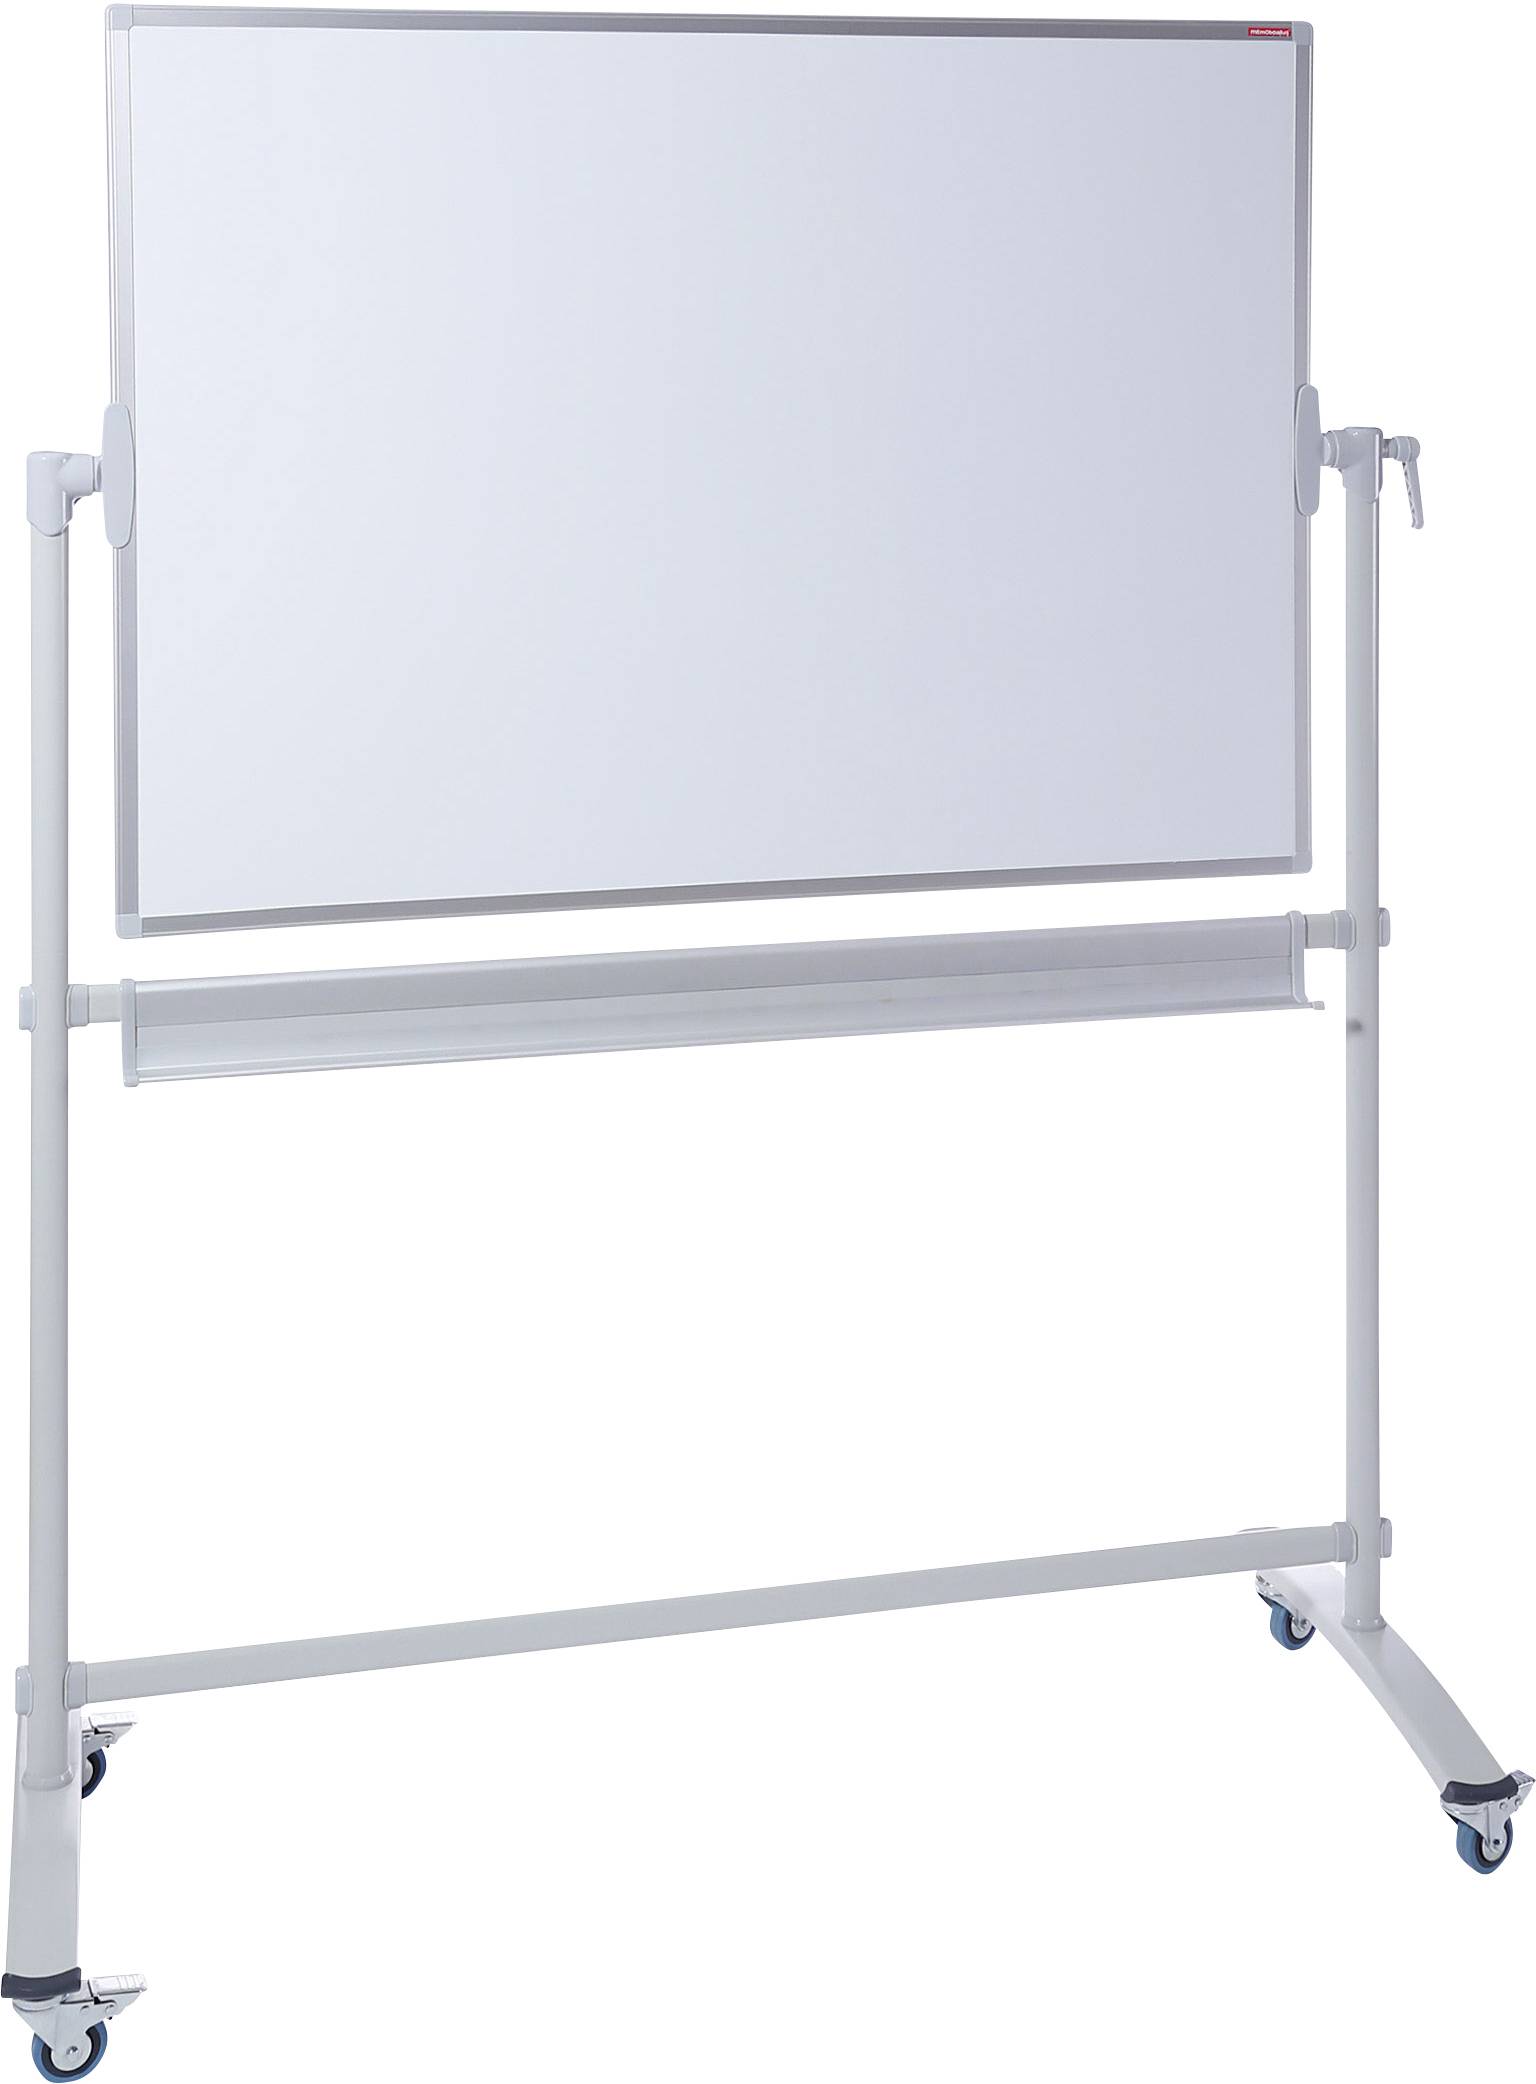 Beraadslagen Politiebureau Eed Dahle Mobile whiteboard (W x H) 120 cm x 180 cm White Painted Flippable,  Usable on both sides, Incl. tray, Incl. caster | Conrad.com